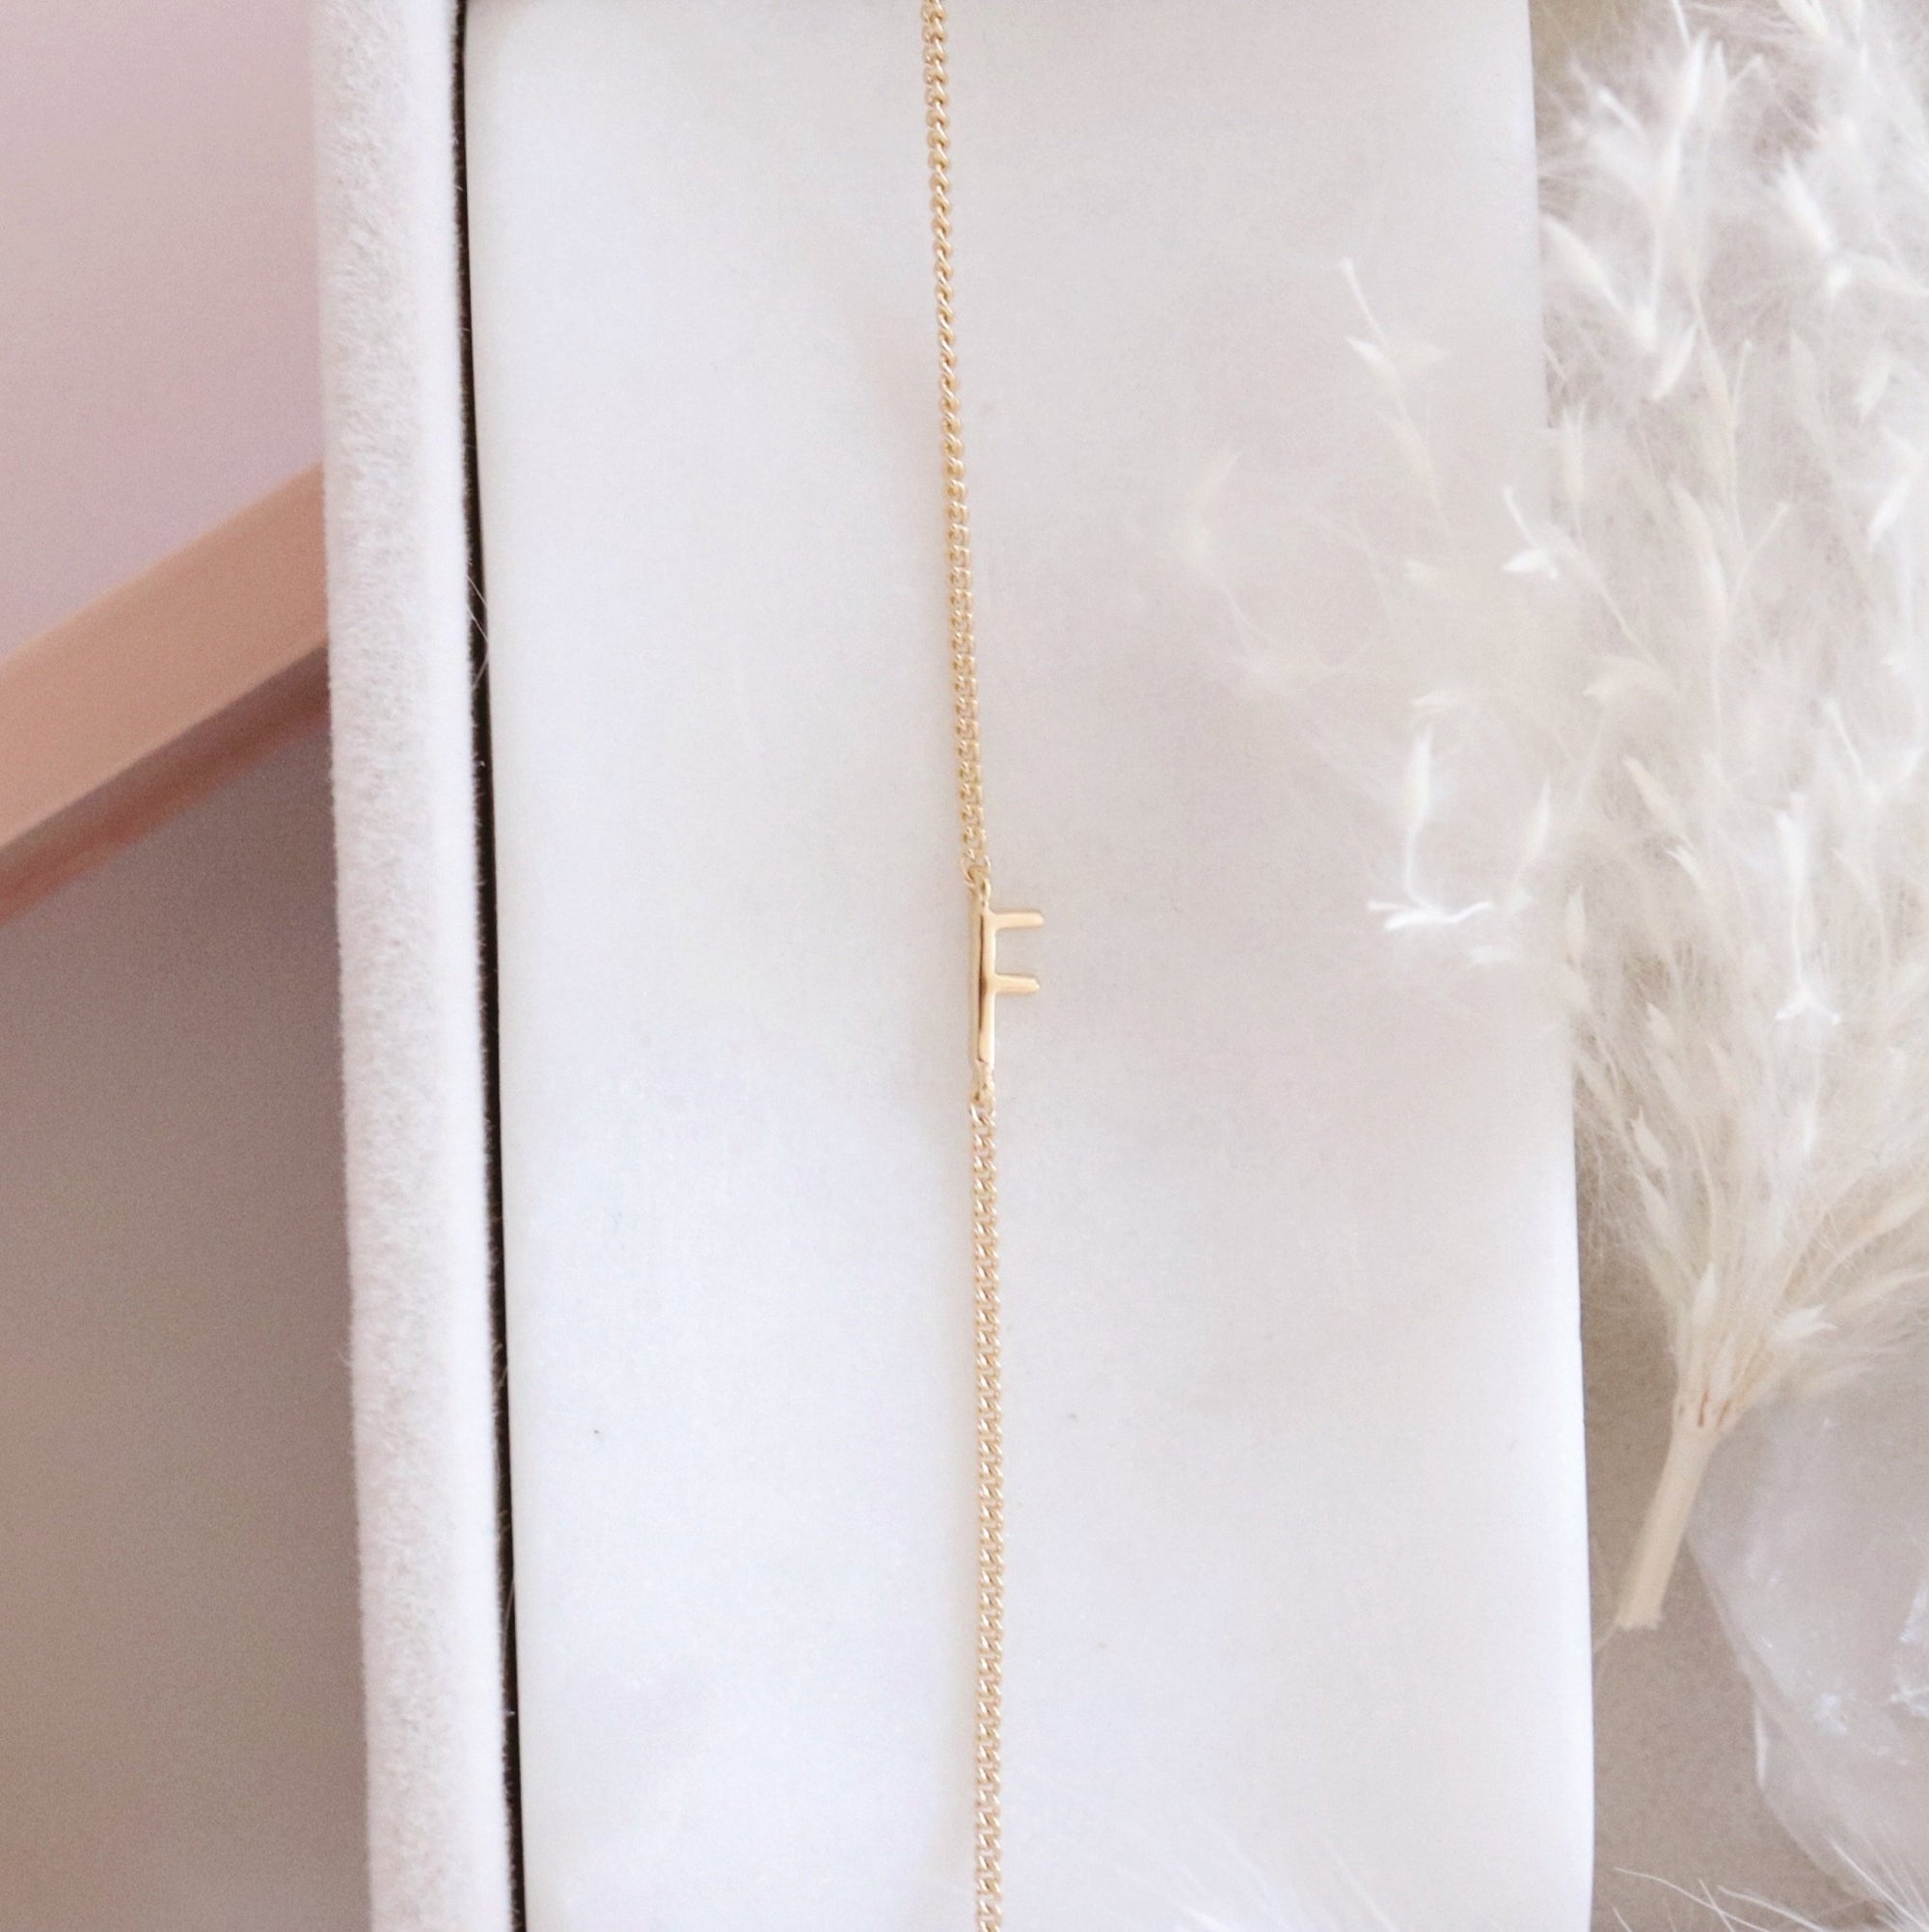 NOTABLE OFFSET INITIAL NECKLACE - F - GOLD - SO PRETTY CARA COTTER